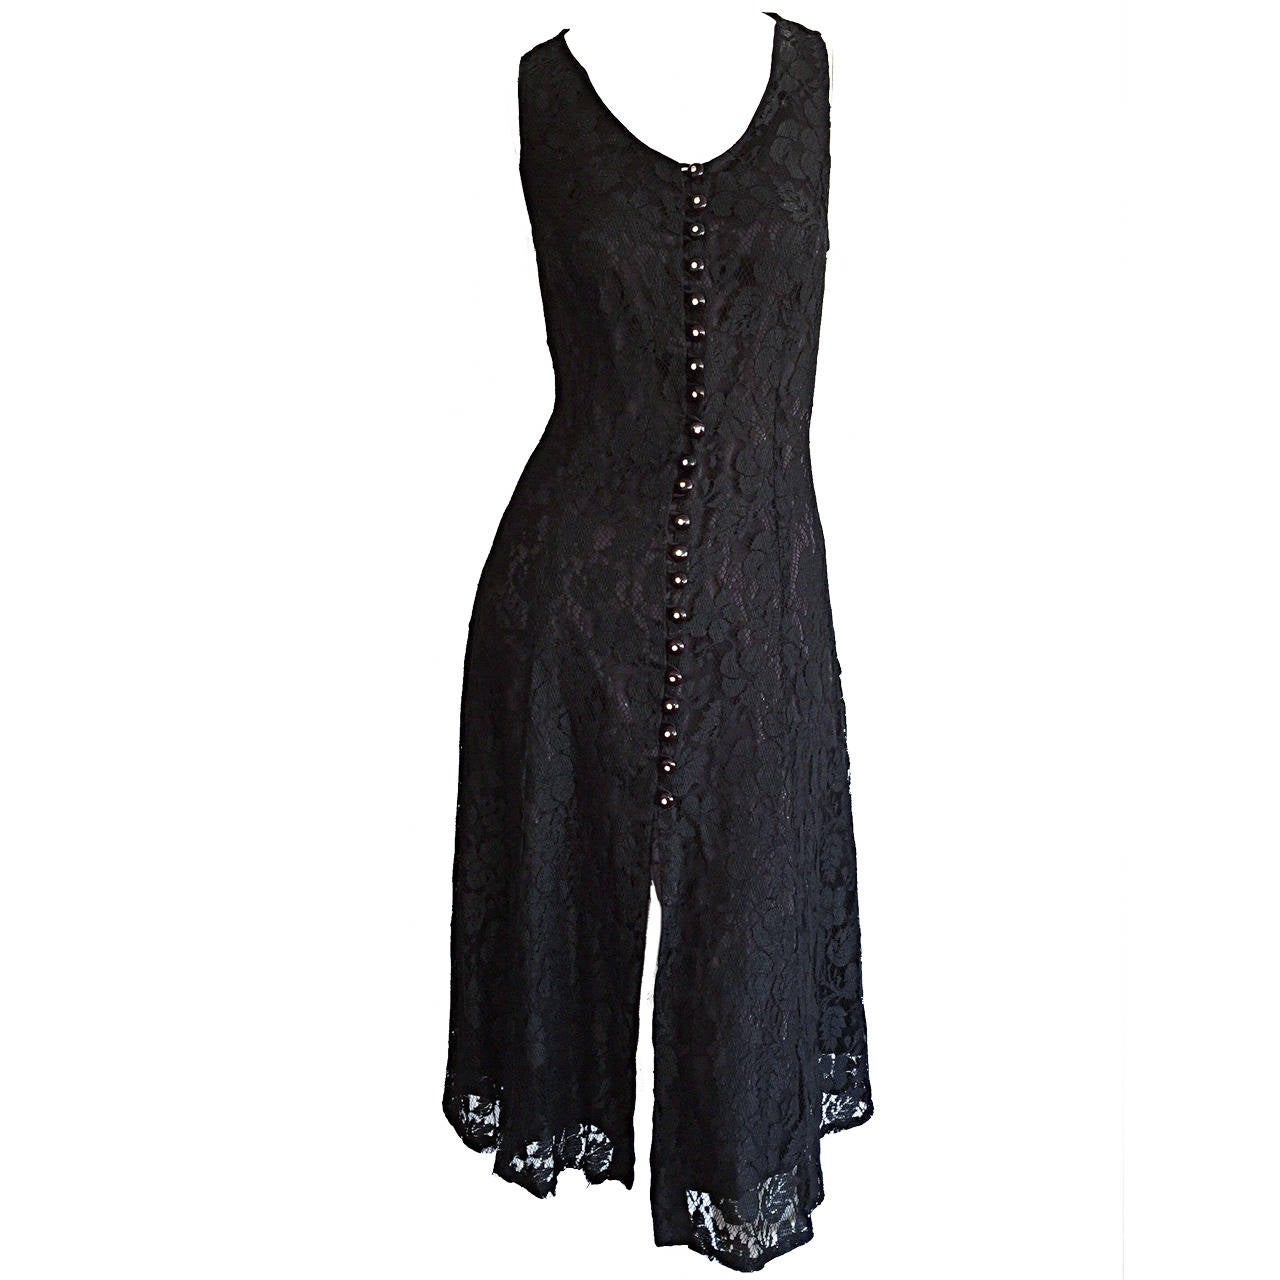 Paco Rabbane 1990s Black Lace Babydoll Dressw/ Rhinestone Buttons For Sale